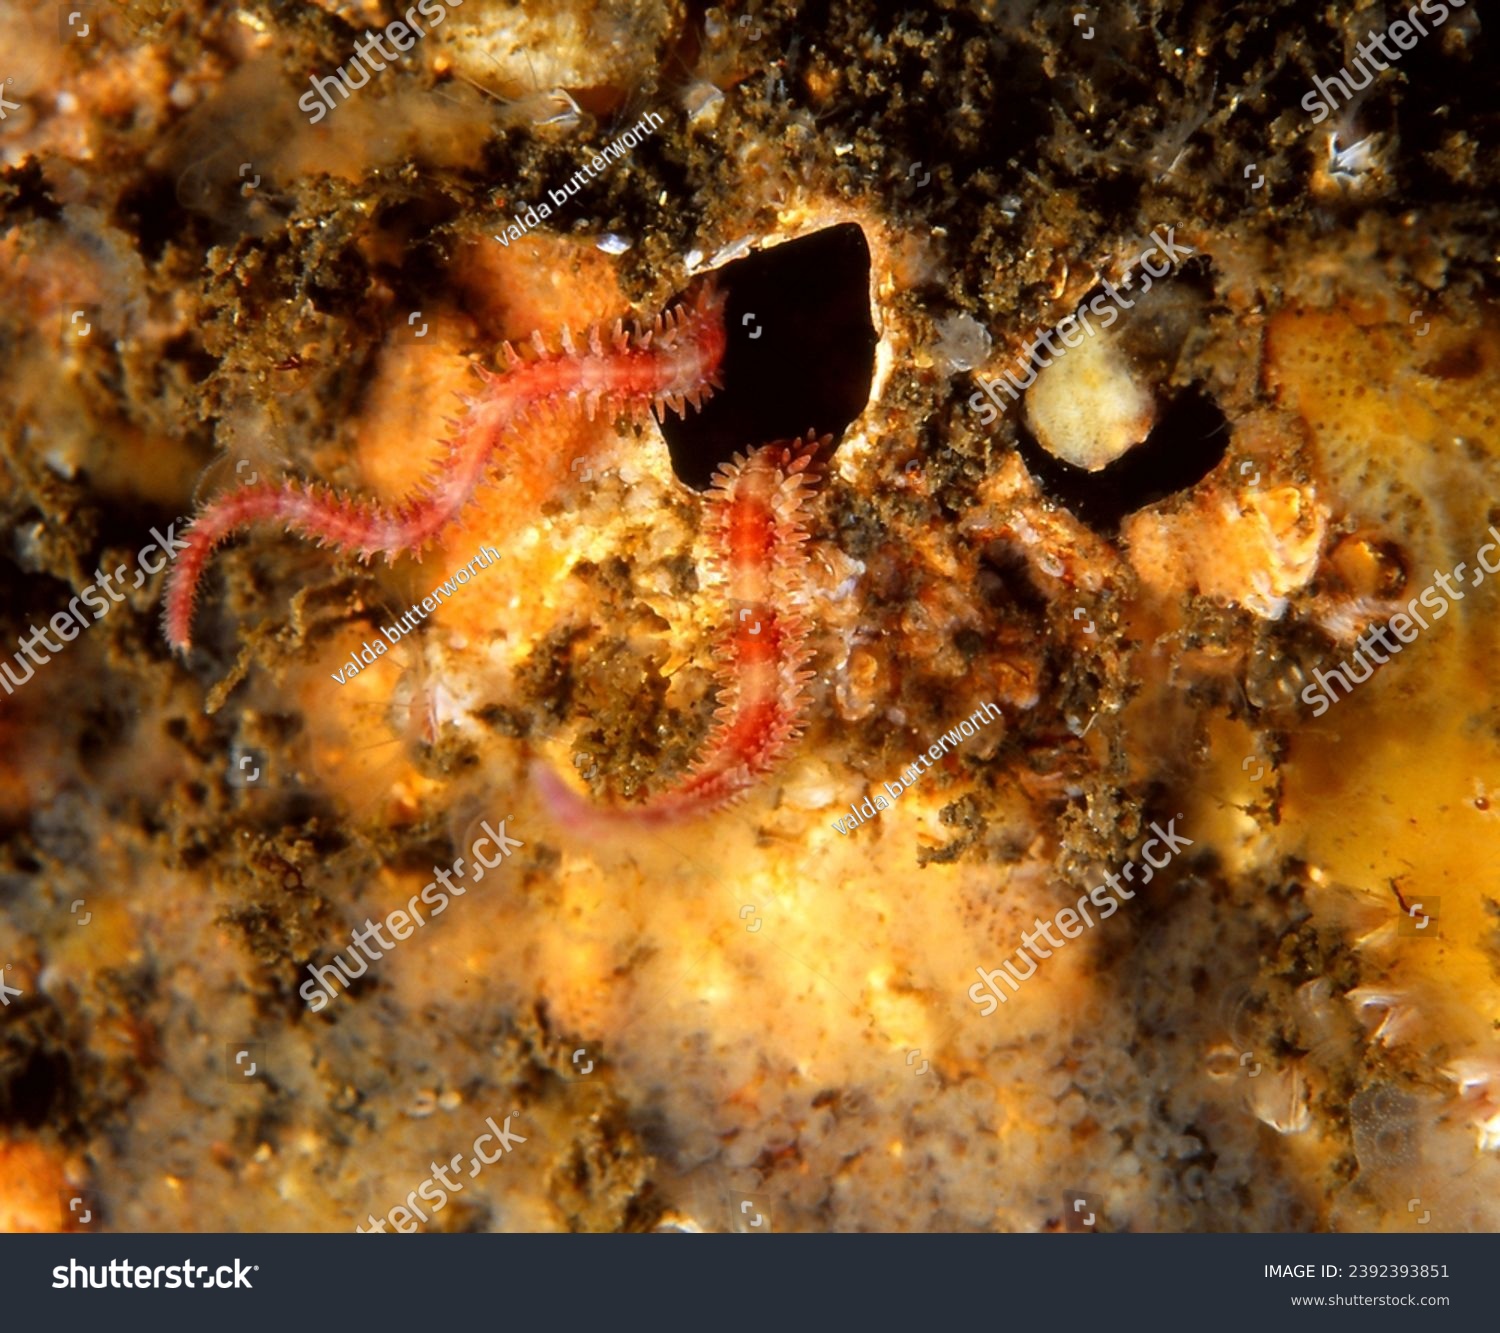 close up of crevice brittle star (also known as a daisy or mottled brittle star) with its twisted arms extending from crevice in  reef wall #2392393851